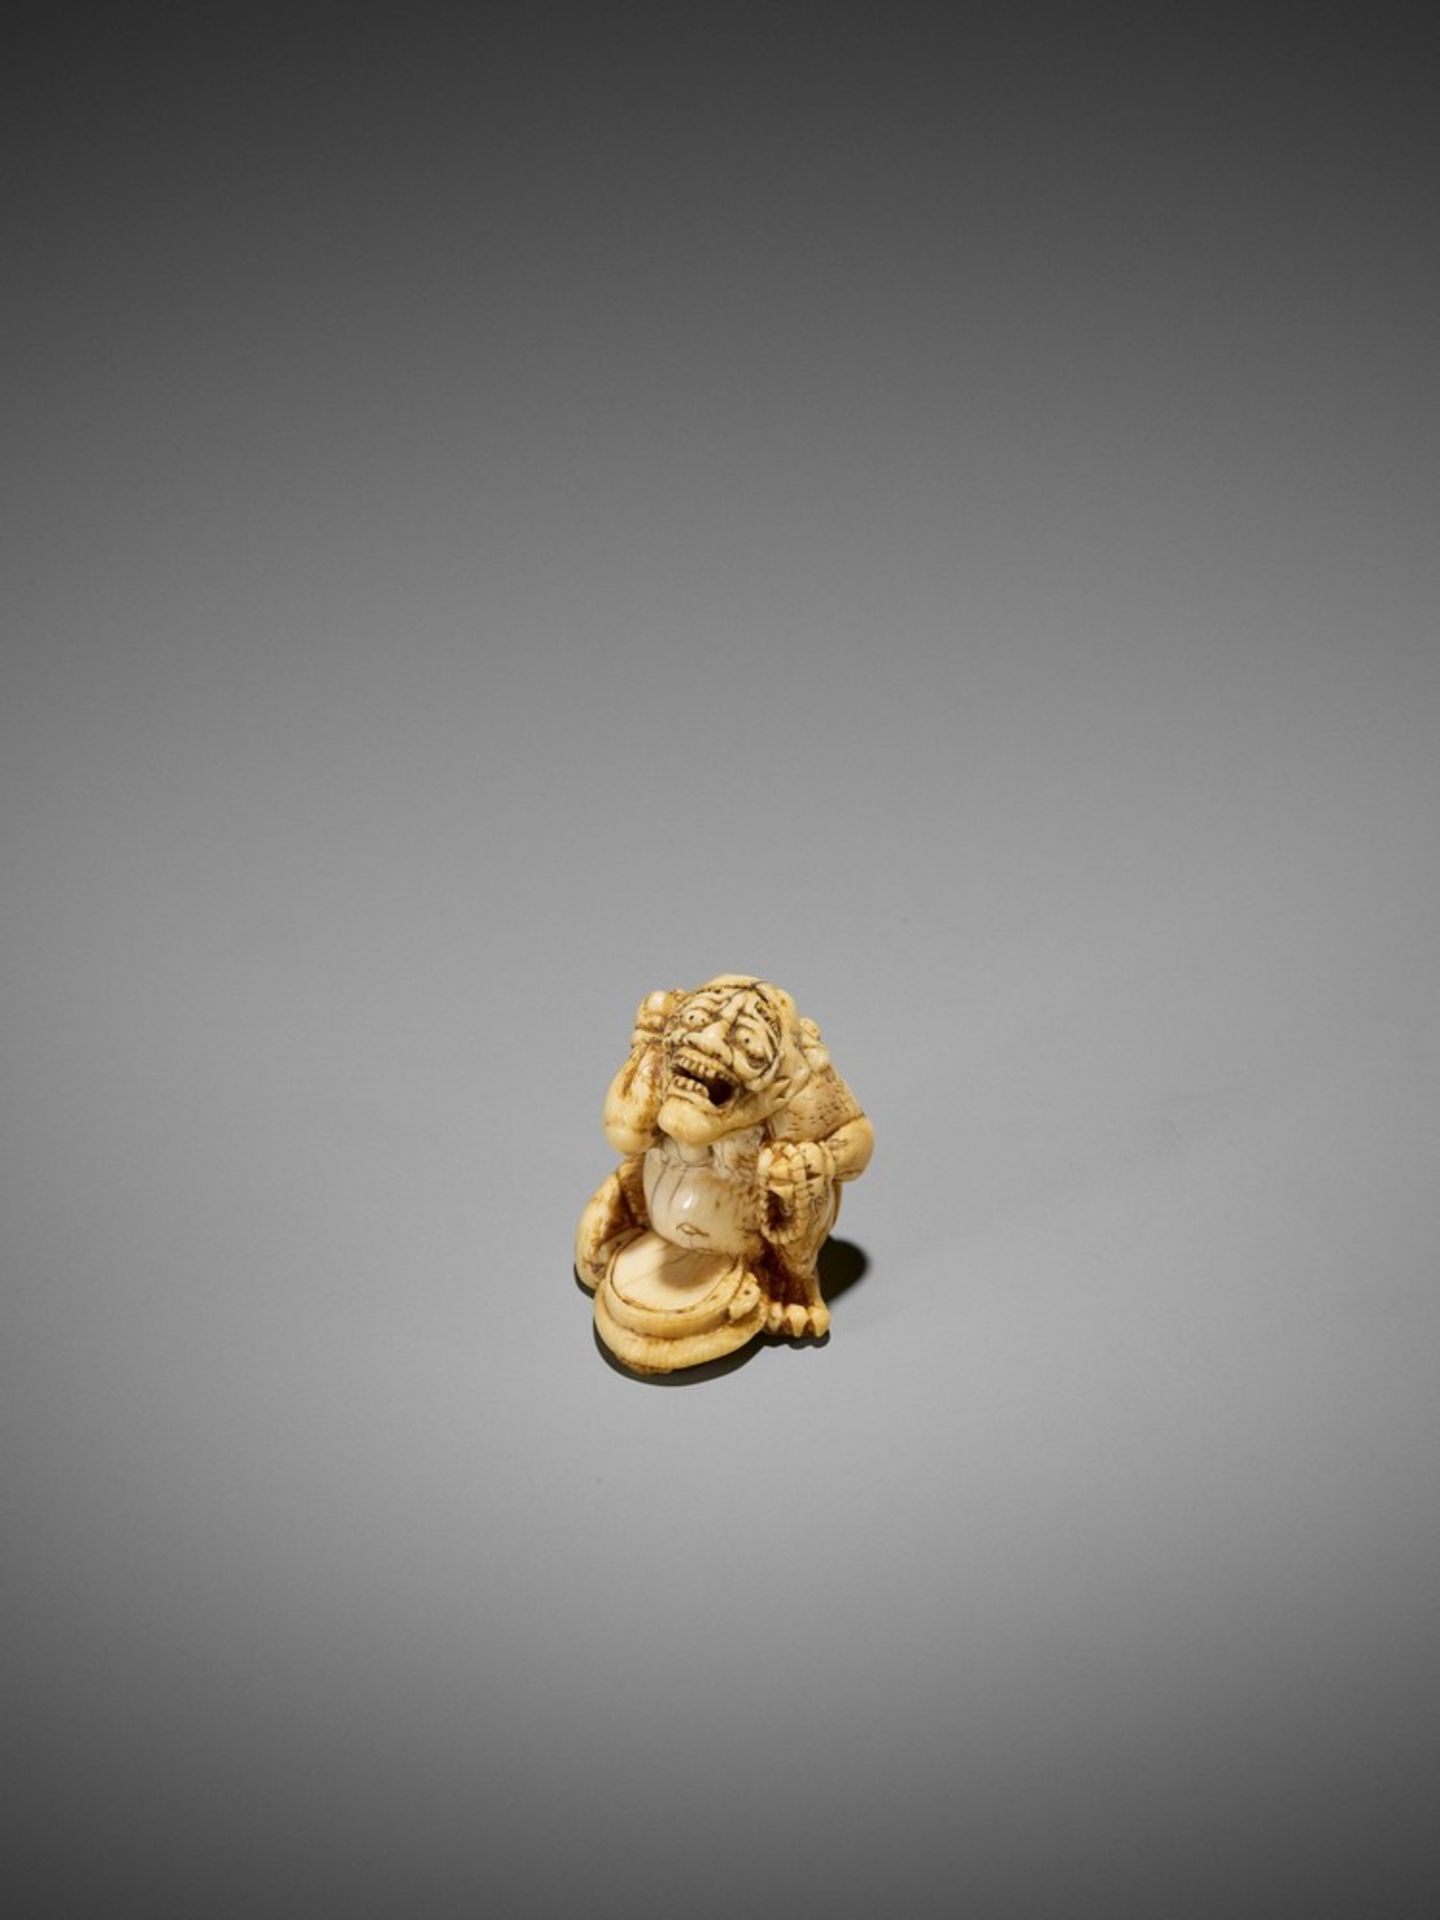 AN EARLY IVORY NETSUKE OF A REPENTING ONI UnsignedJapan, 18th century, Edo period (1615-1868)The - Bild 4 aus 9